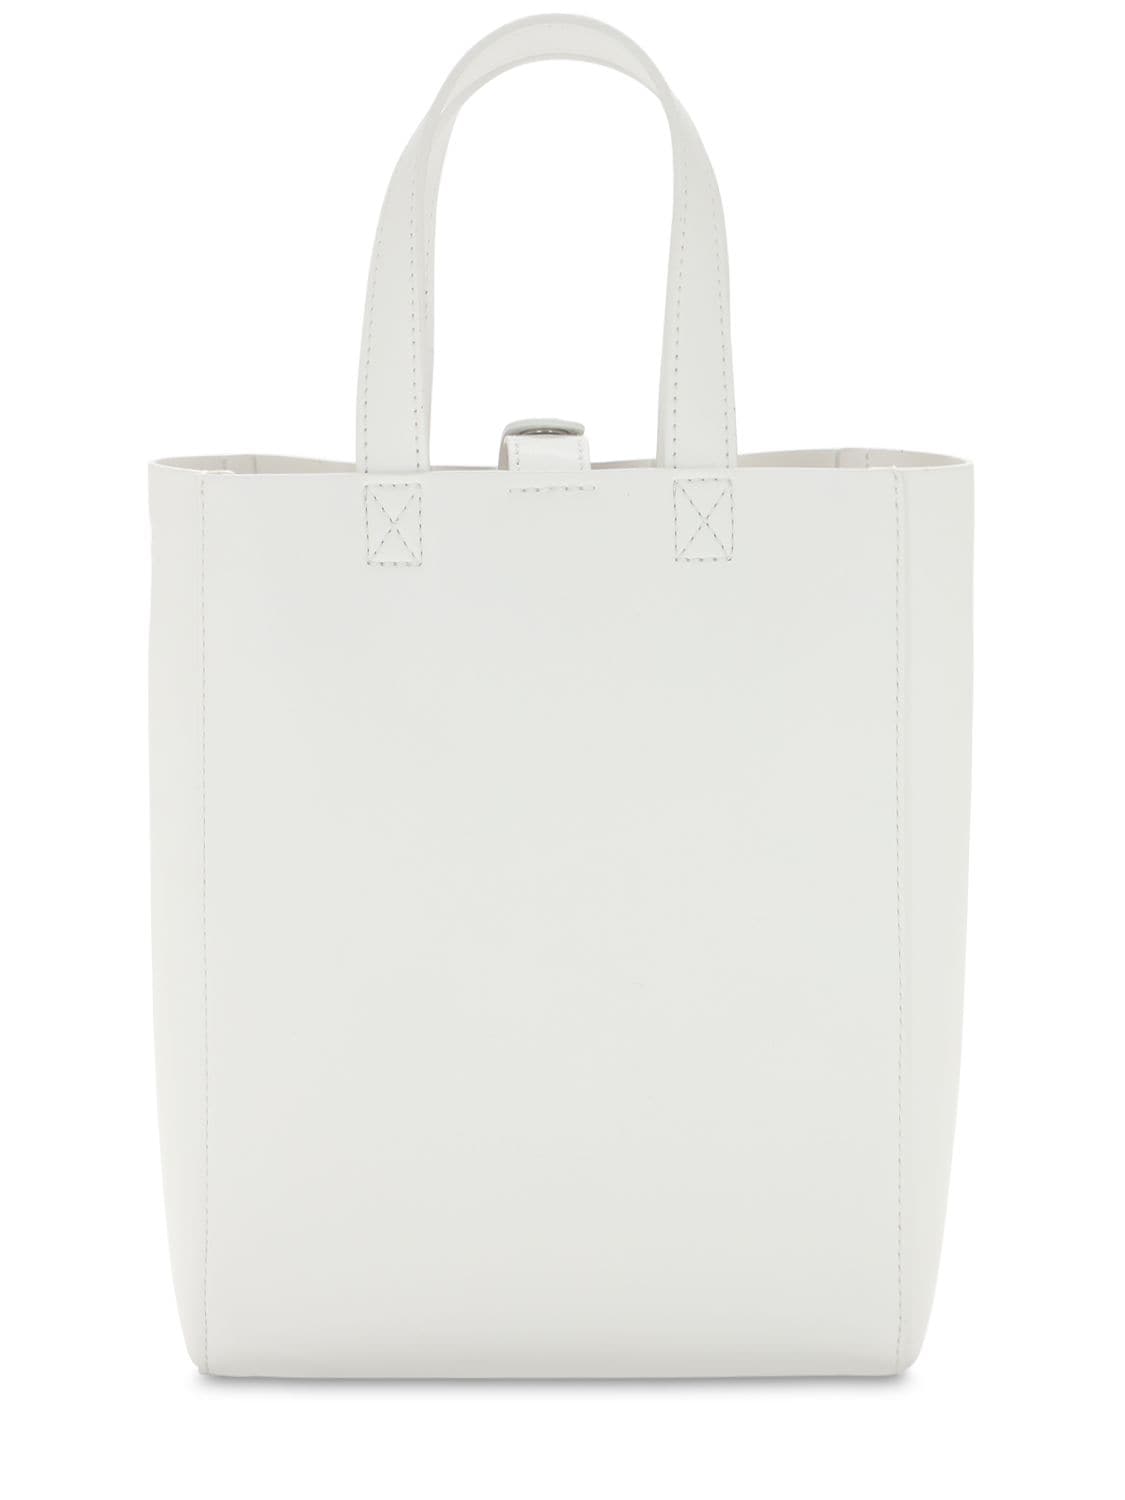 Mm6 Maison Margiela Faux Leather Tote In White